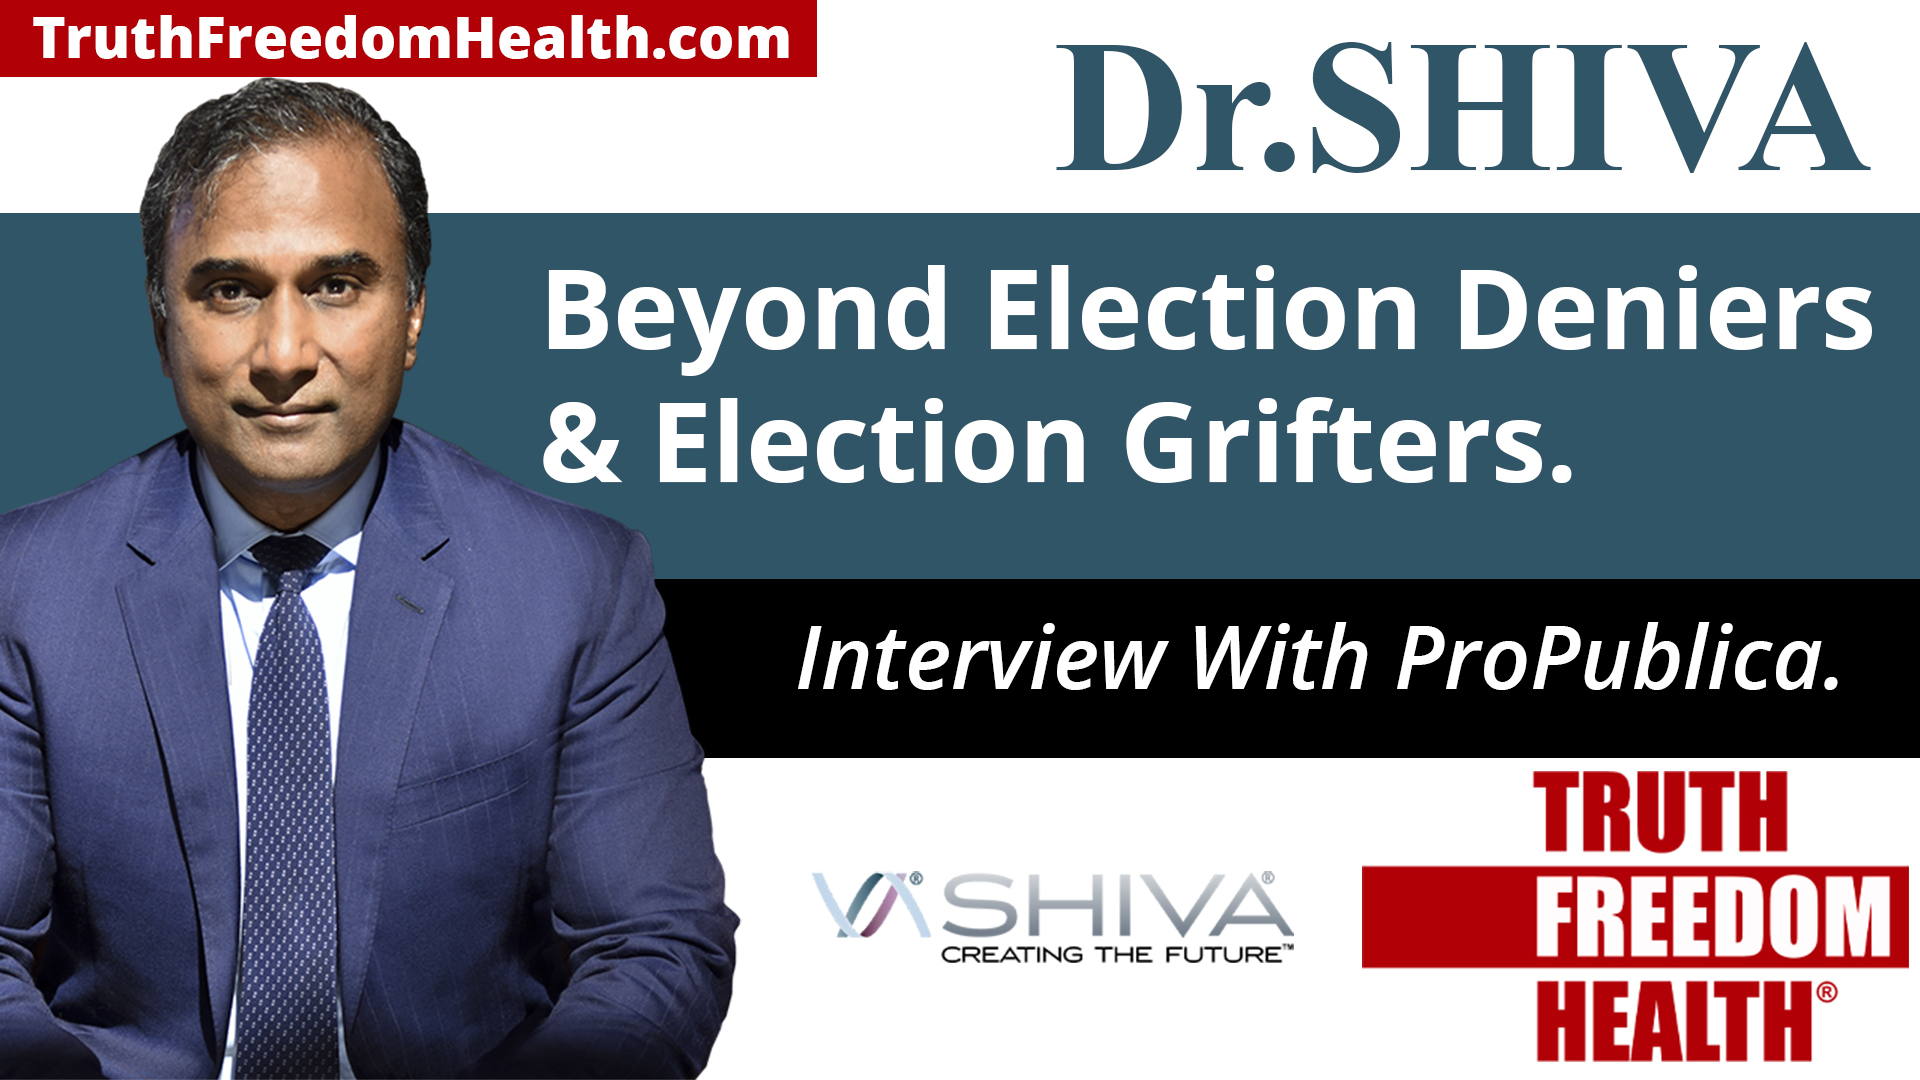 Dr. SHIVA BROADCAST: Beyond Election Deniers & Election Grifters. Interview with ProPublica